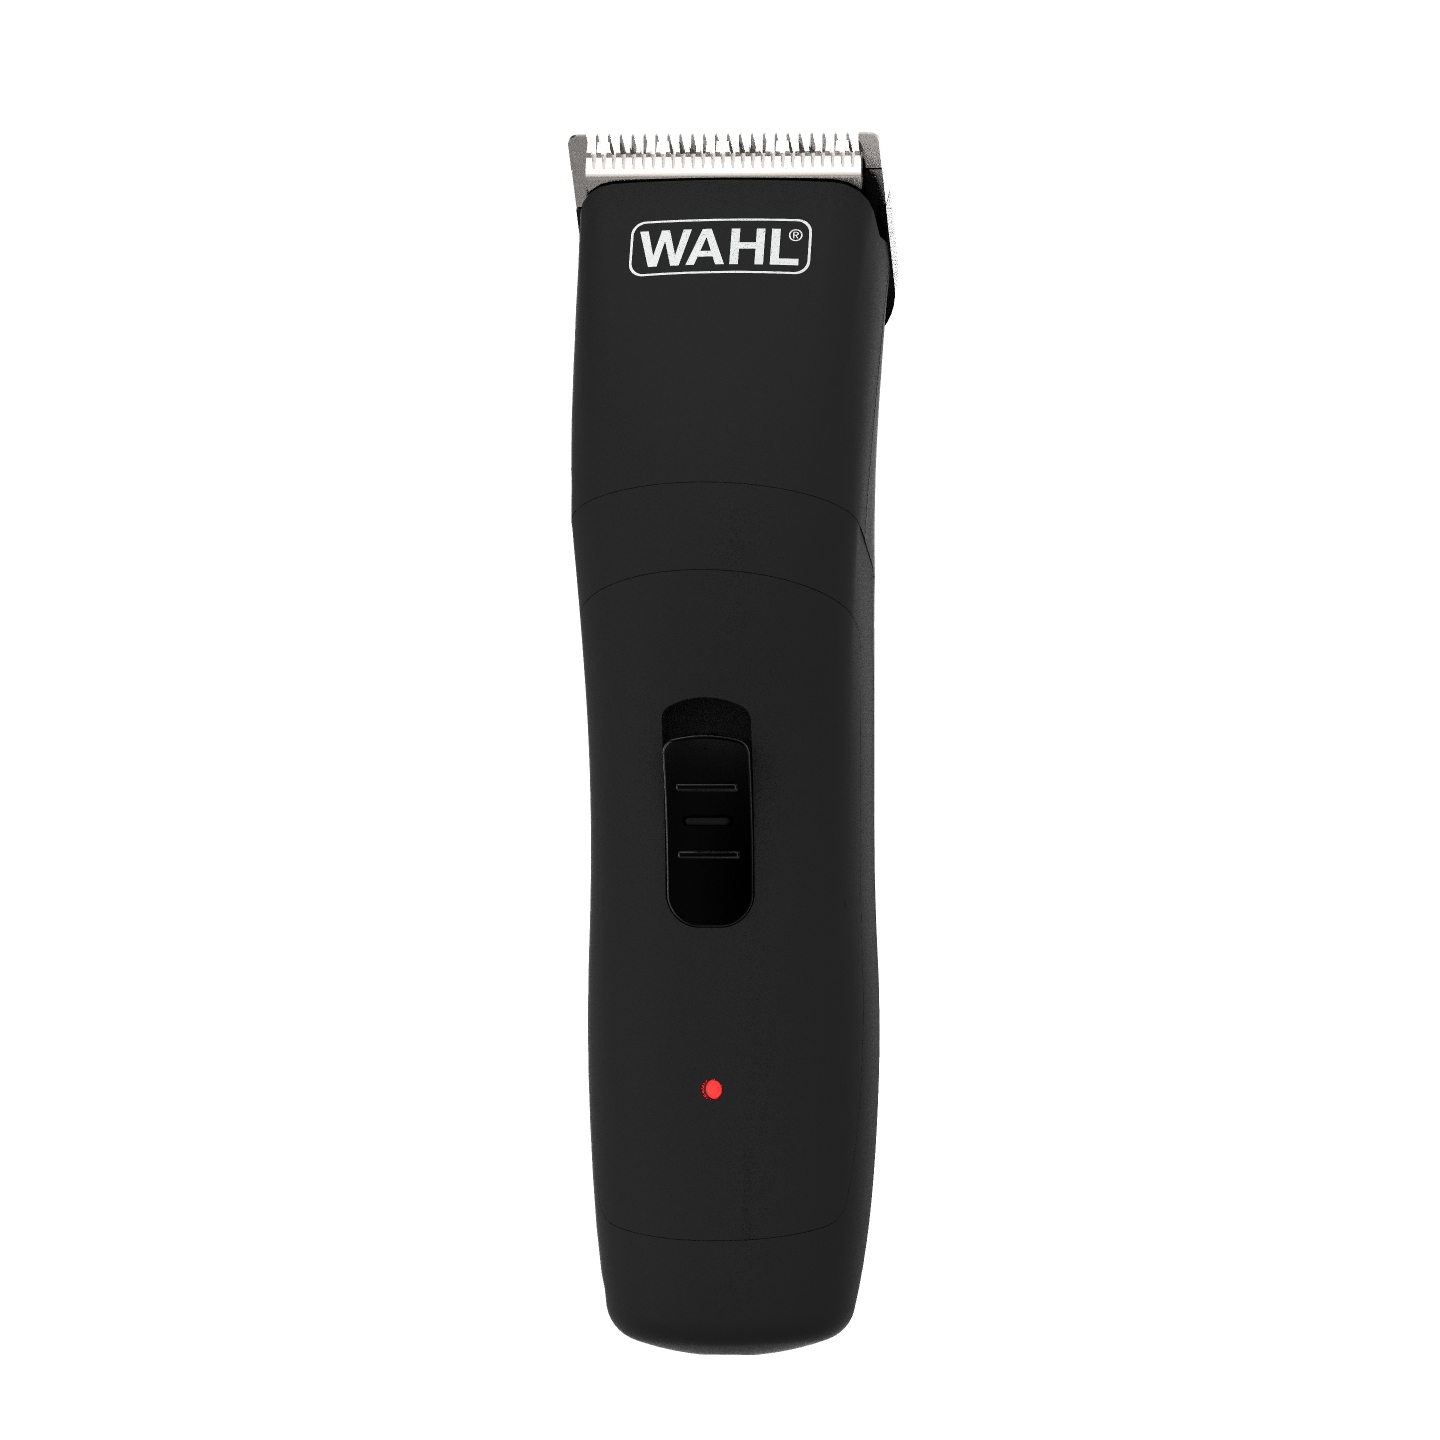 wahl 9655 review